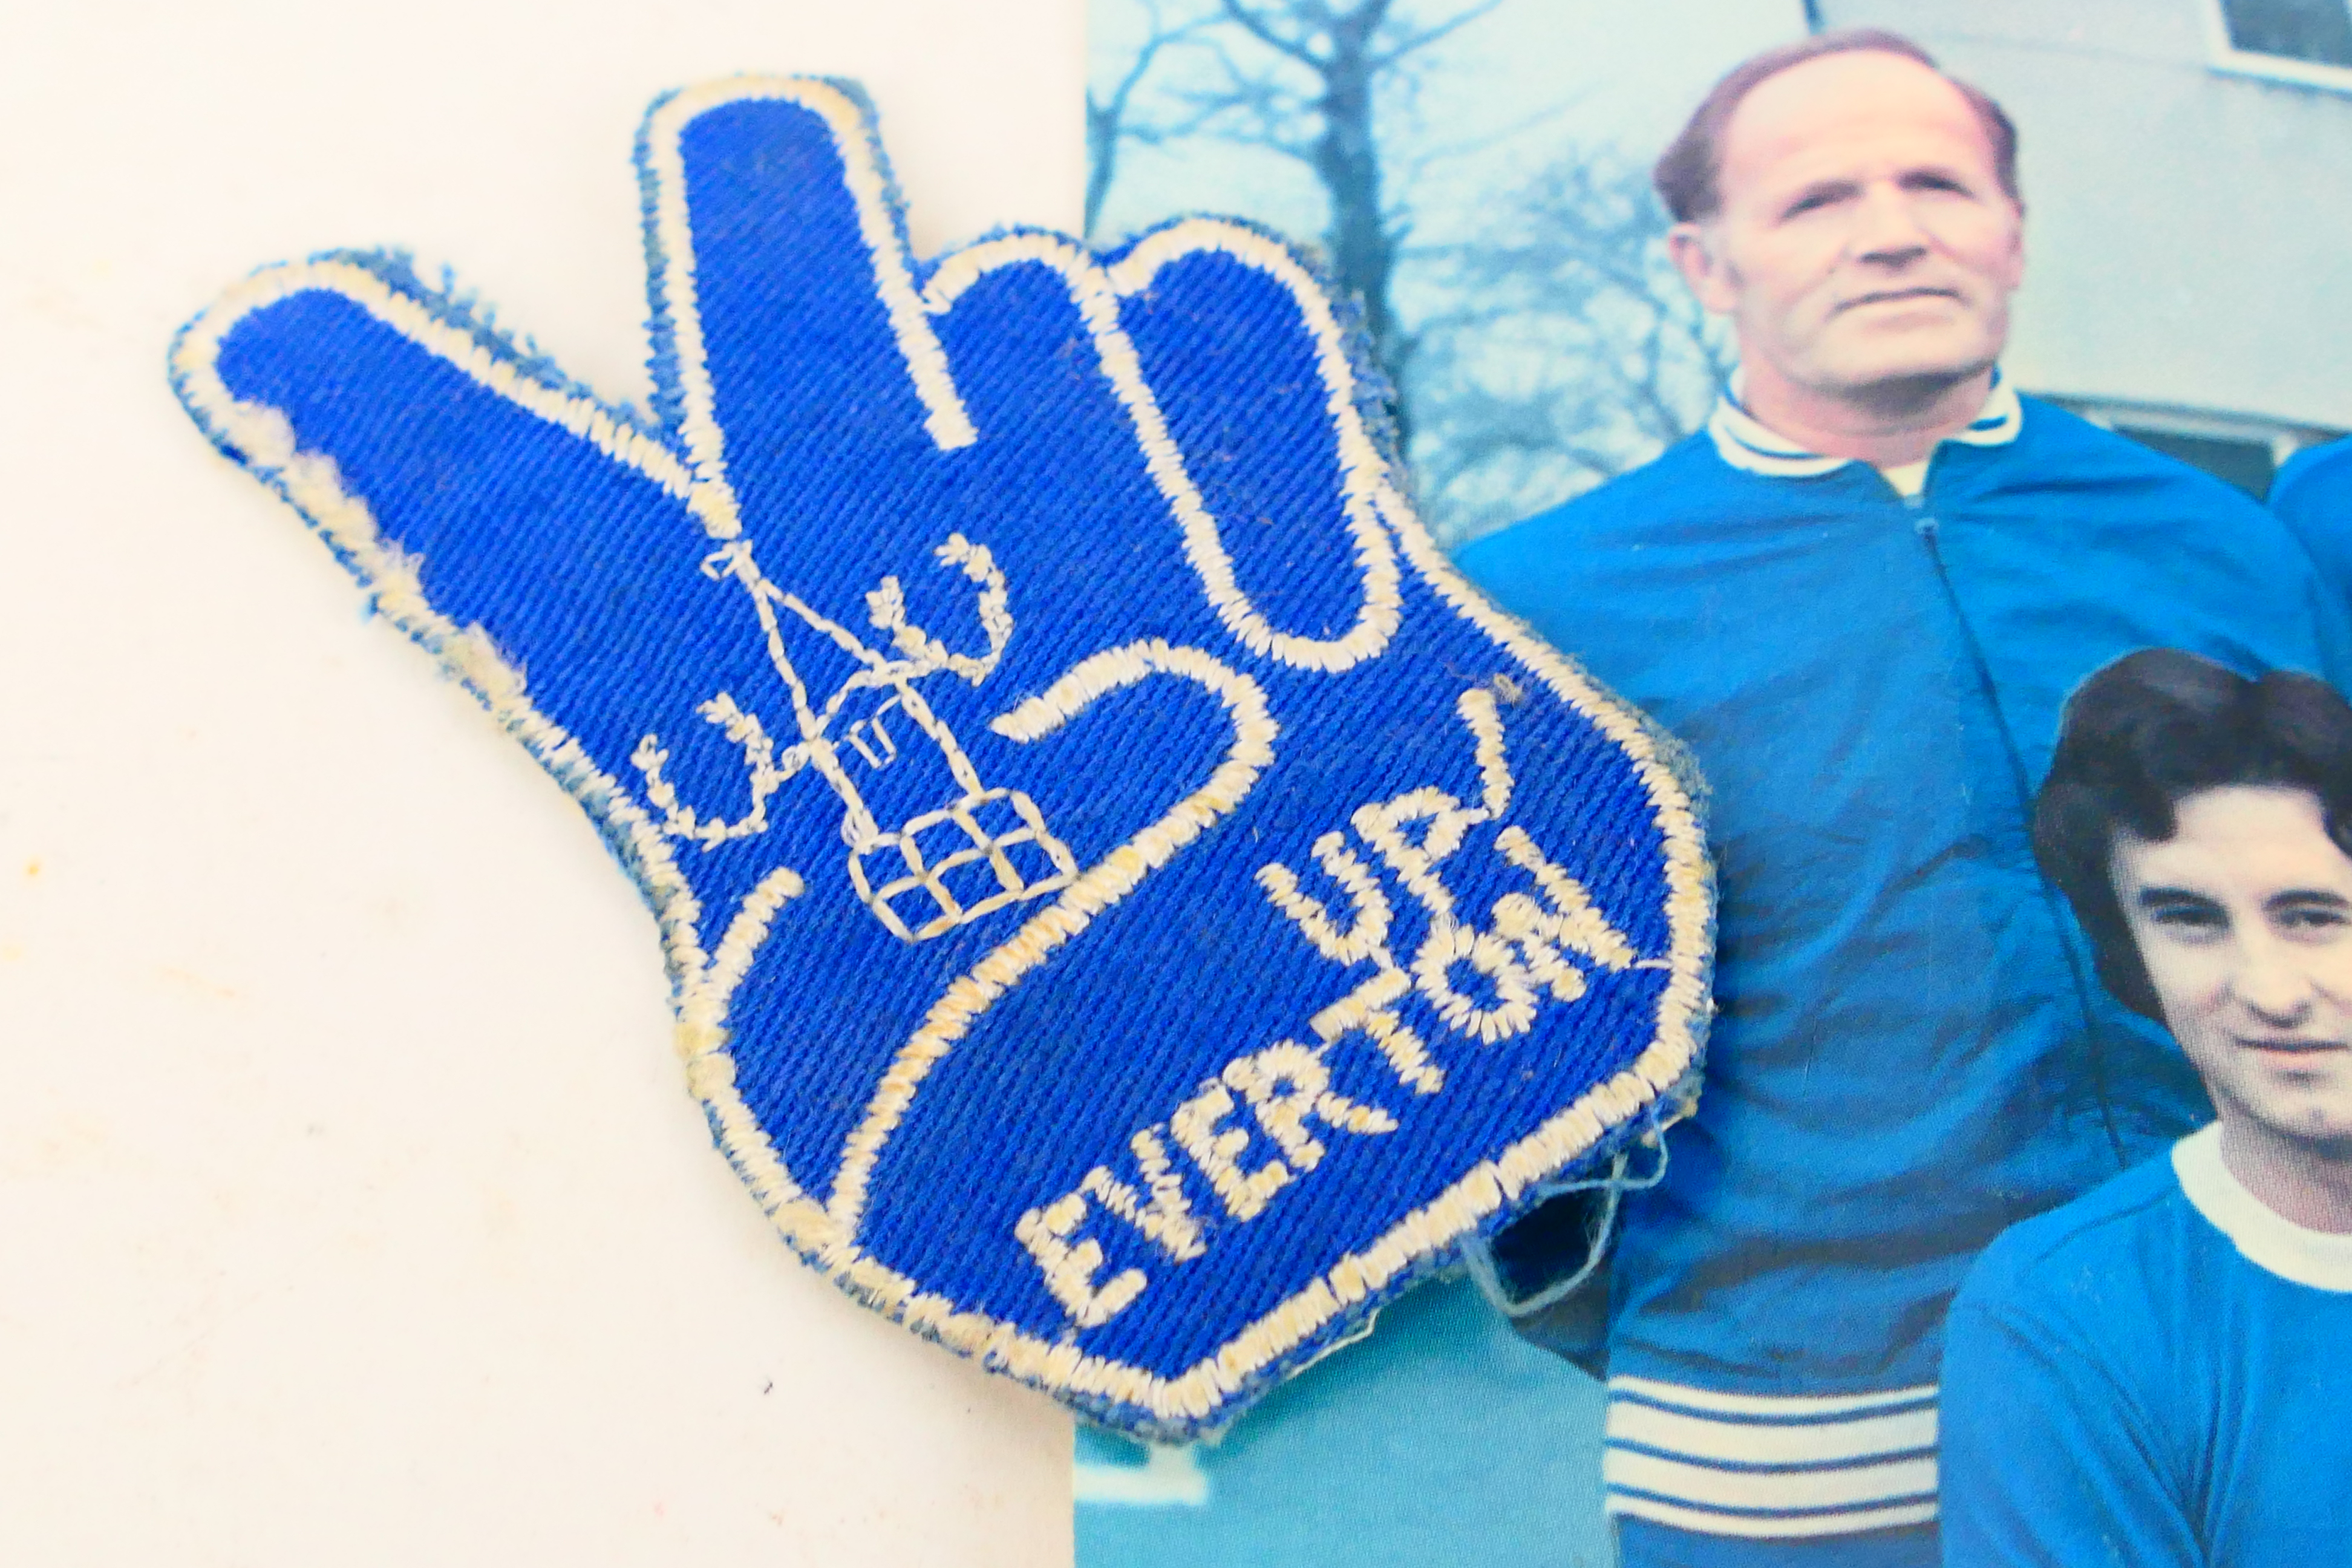 Everton FC Football Items, Contains larg - Image 4 of 4